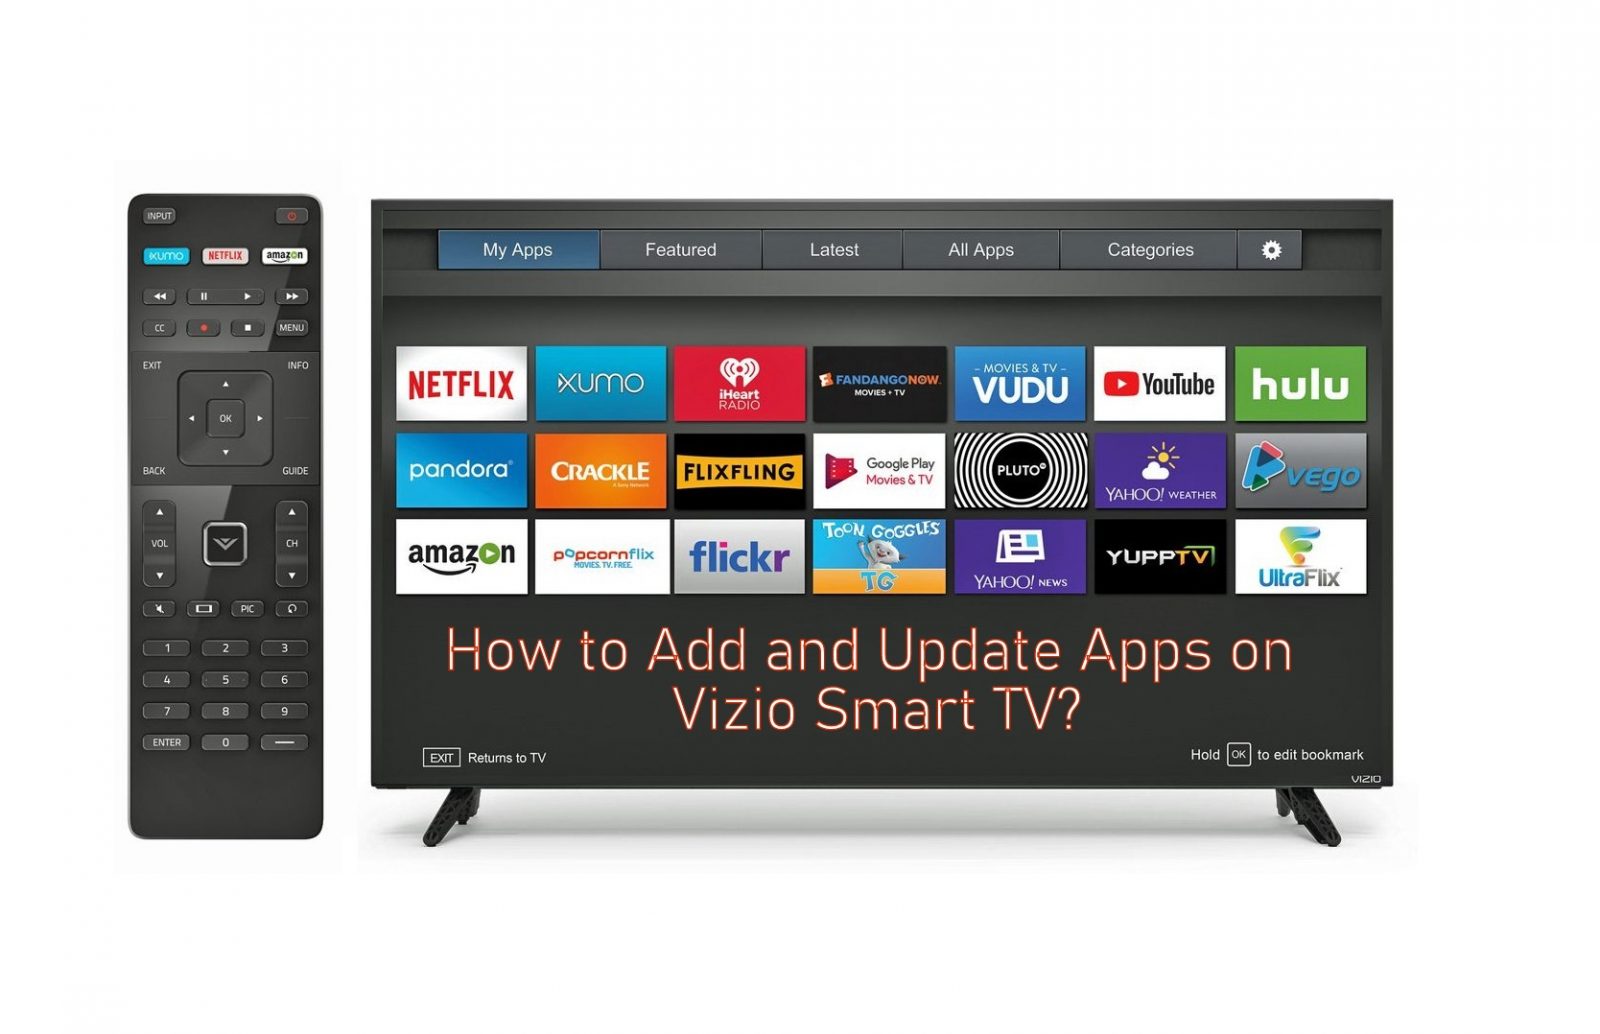 Soplayer on vizio smart tv - How To Add An App To My Vizio Tv